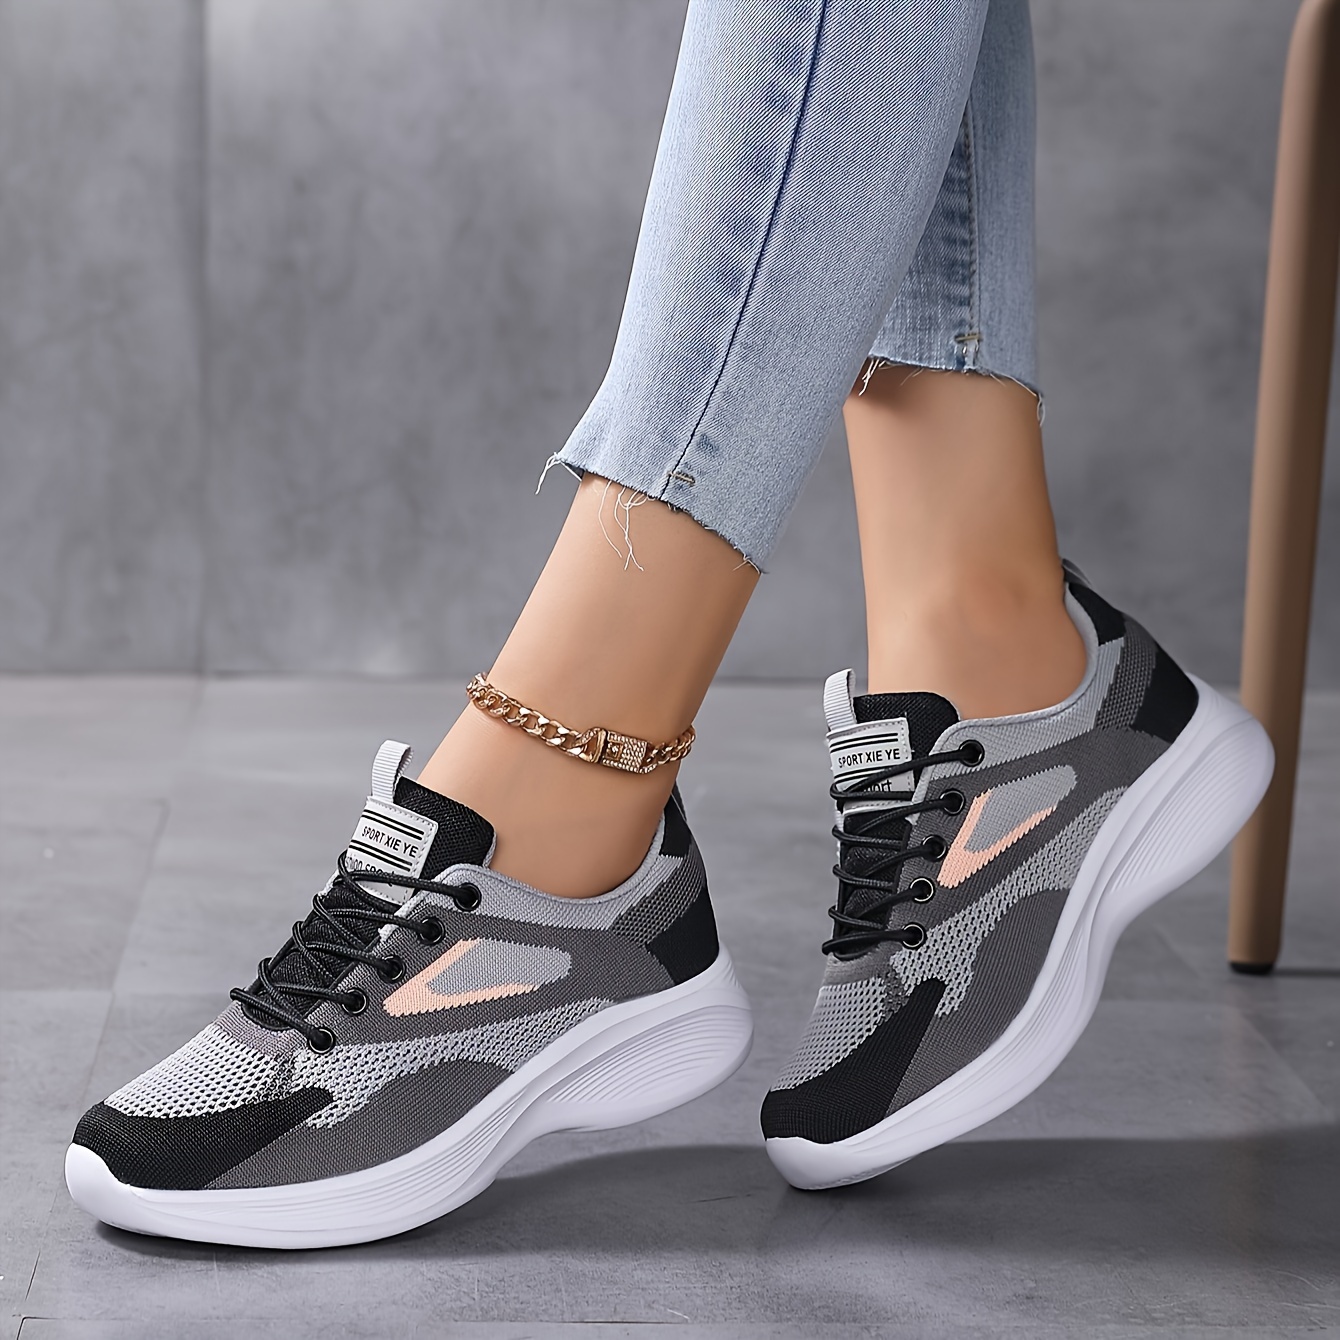 

Women's Breathable Flying Woven Sneakers, Casual Lace Up Outdoor Shoes, Comfortable Low Top Shoes